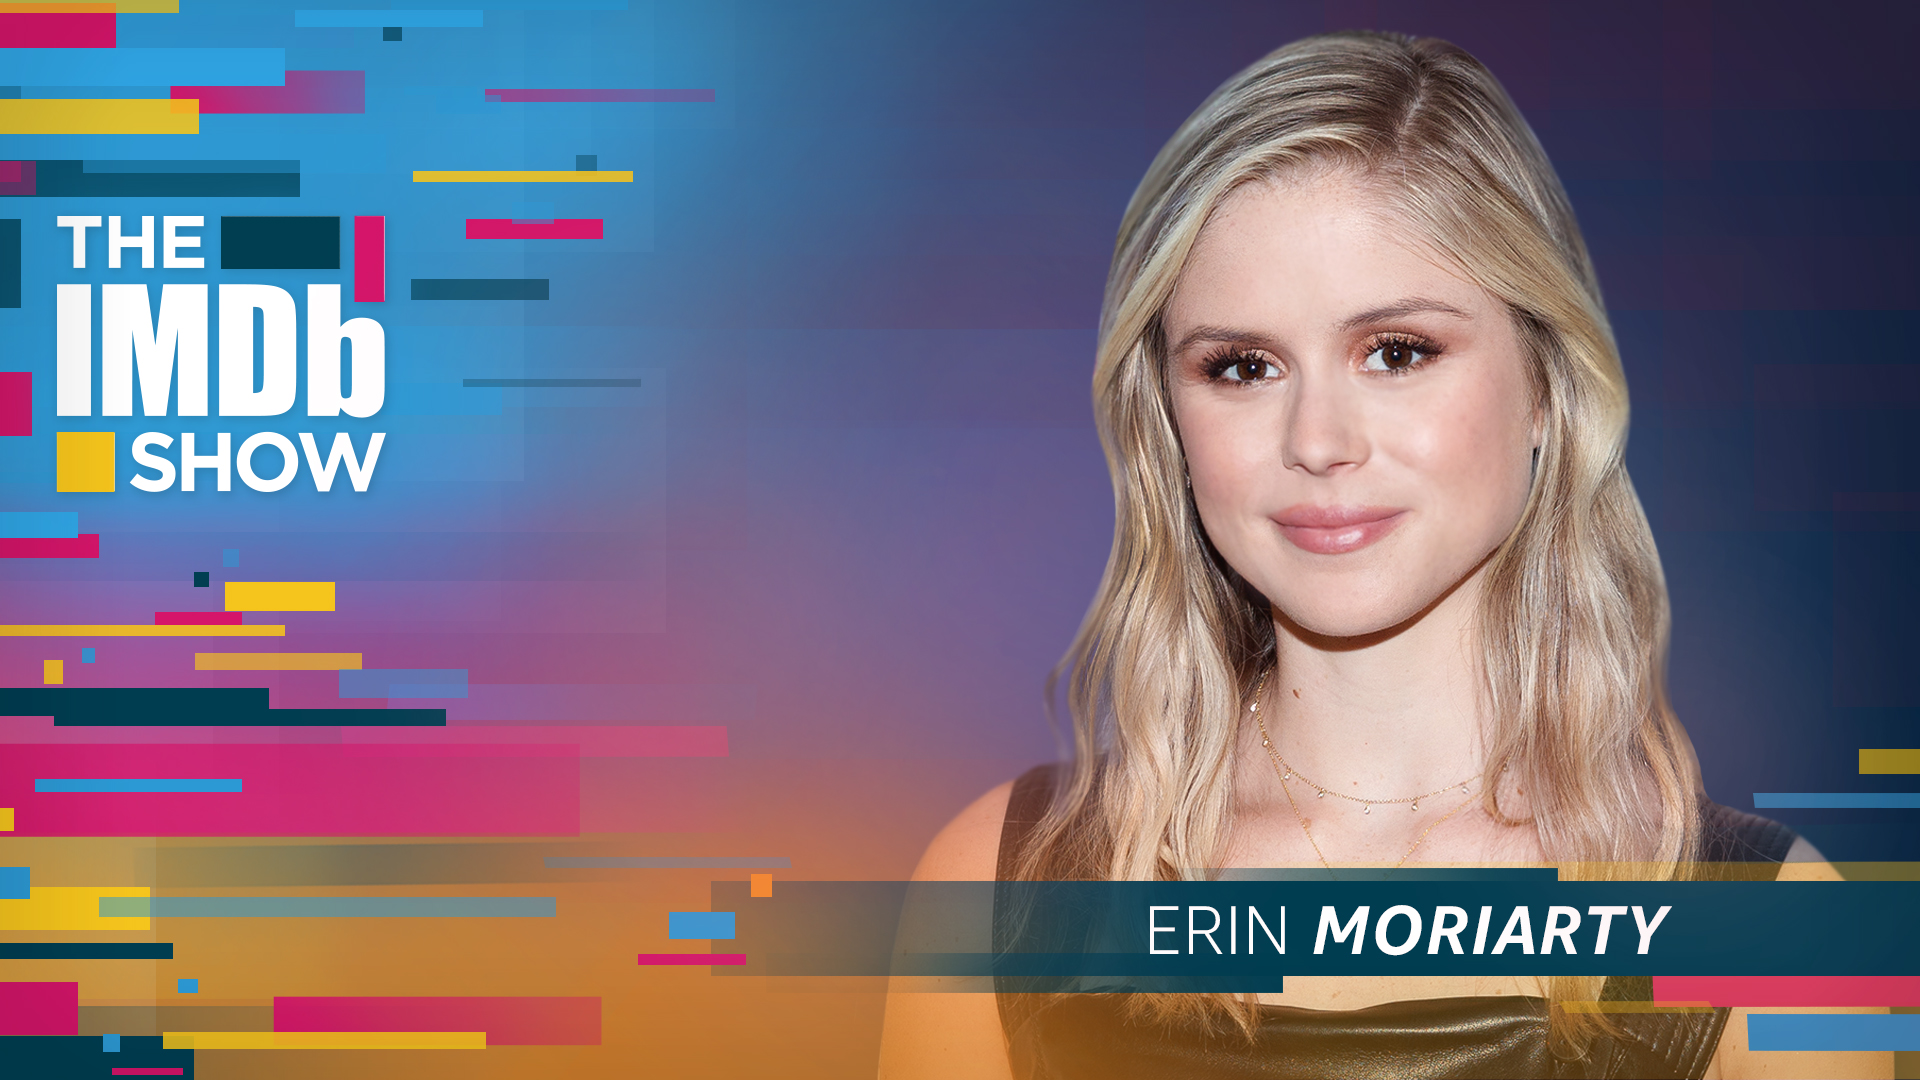 Erin Moriarty 2020 Wallpapers